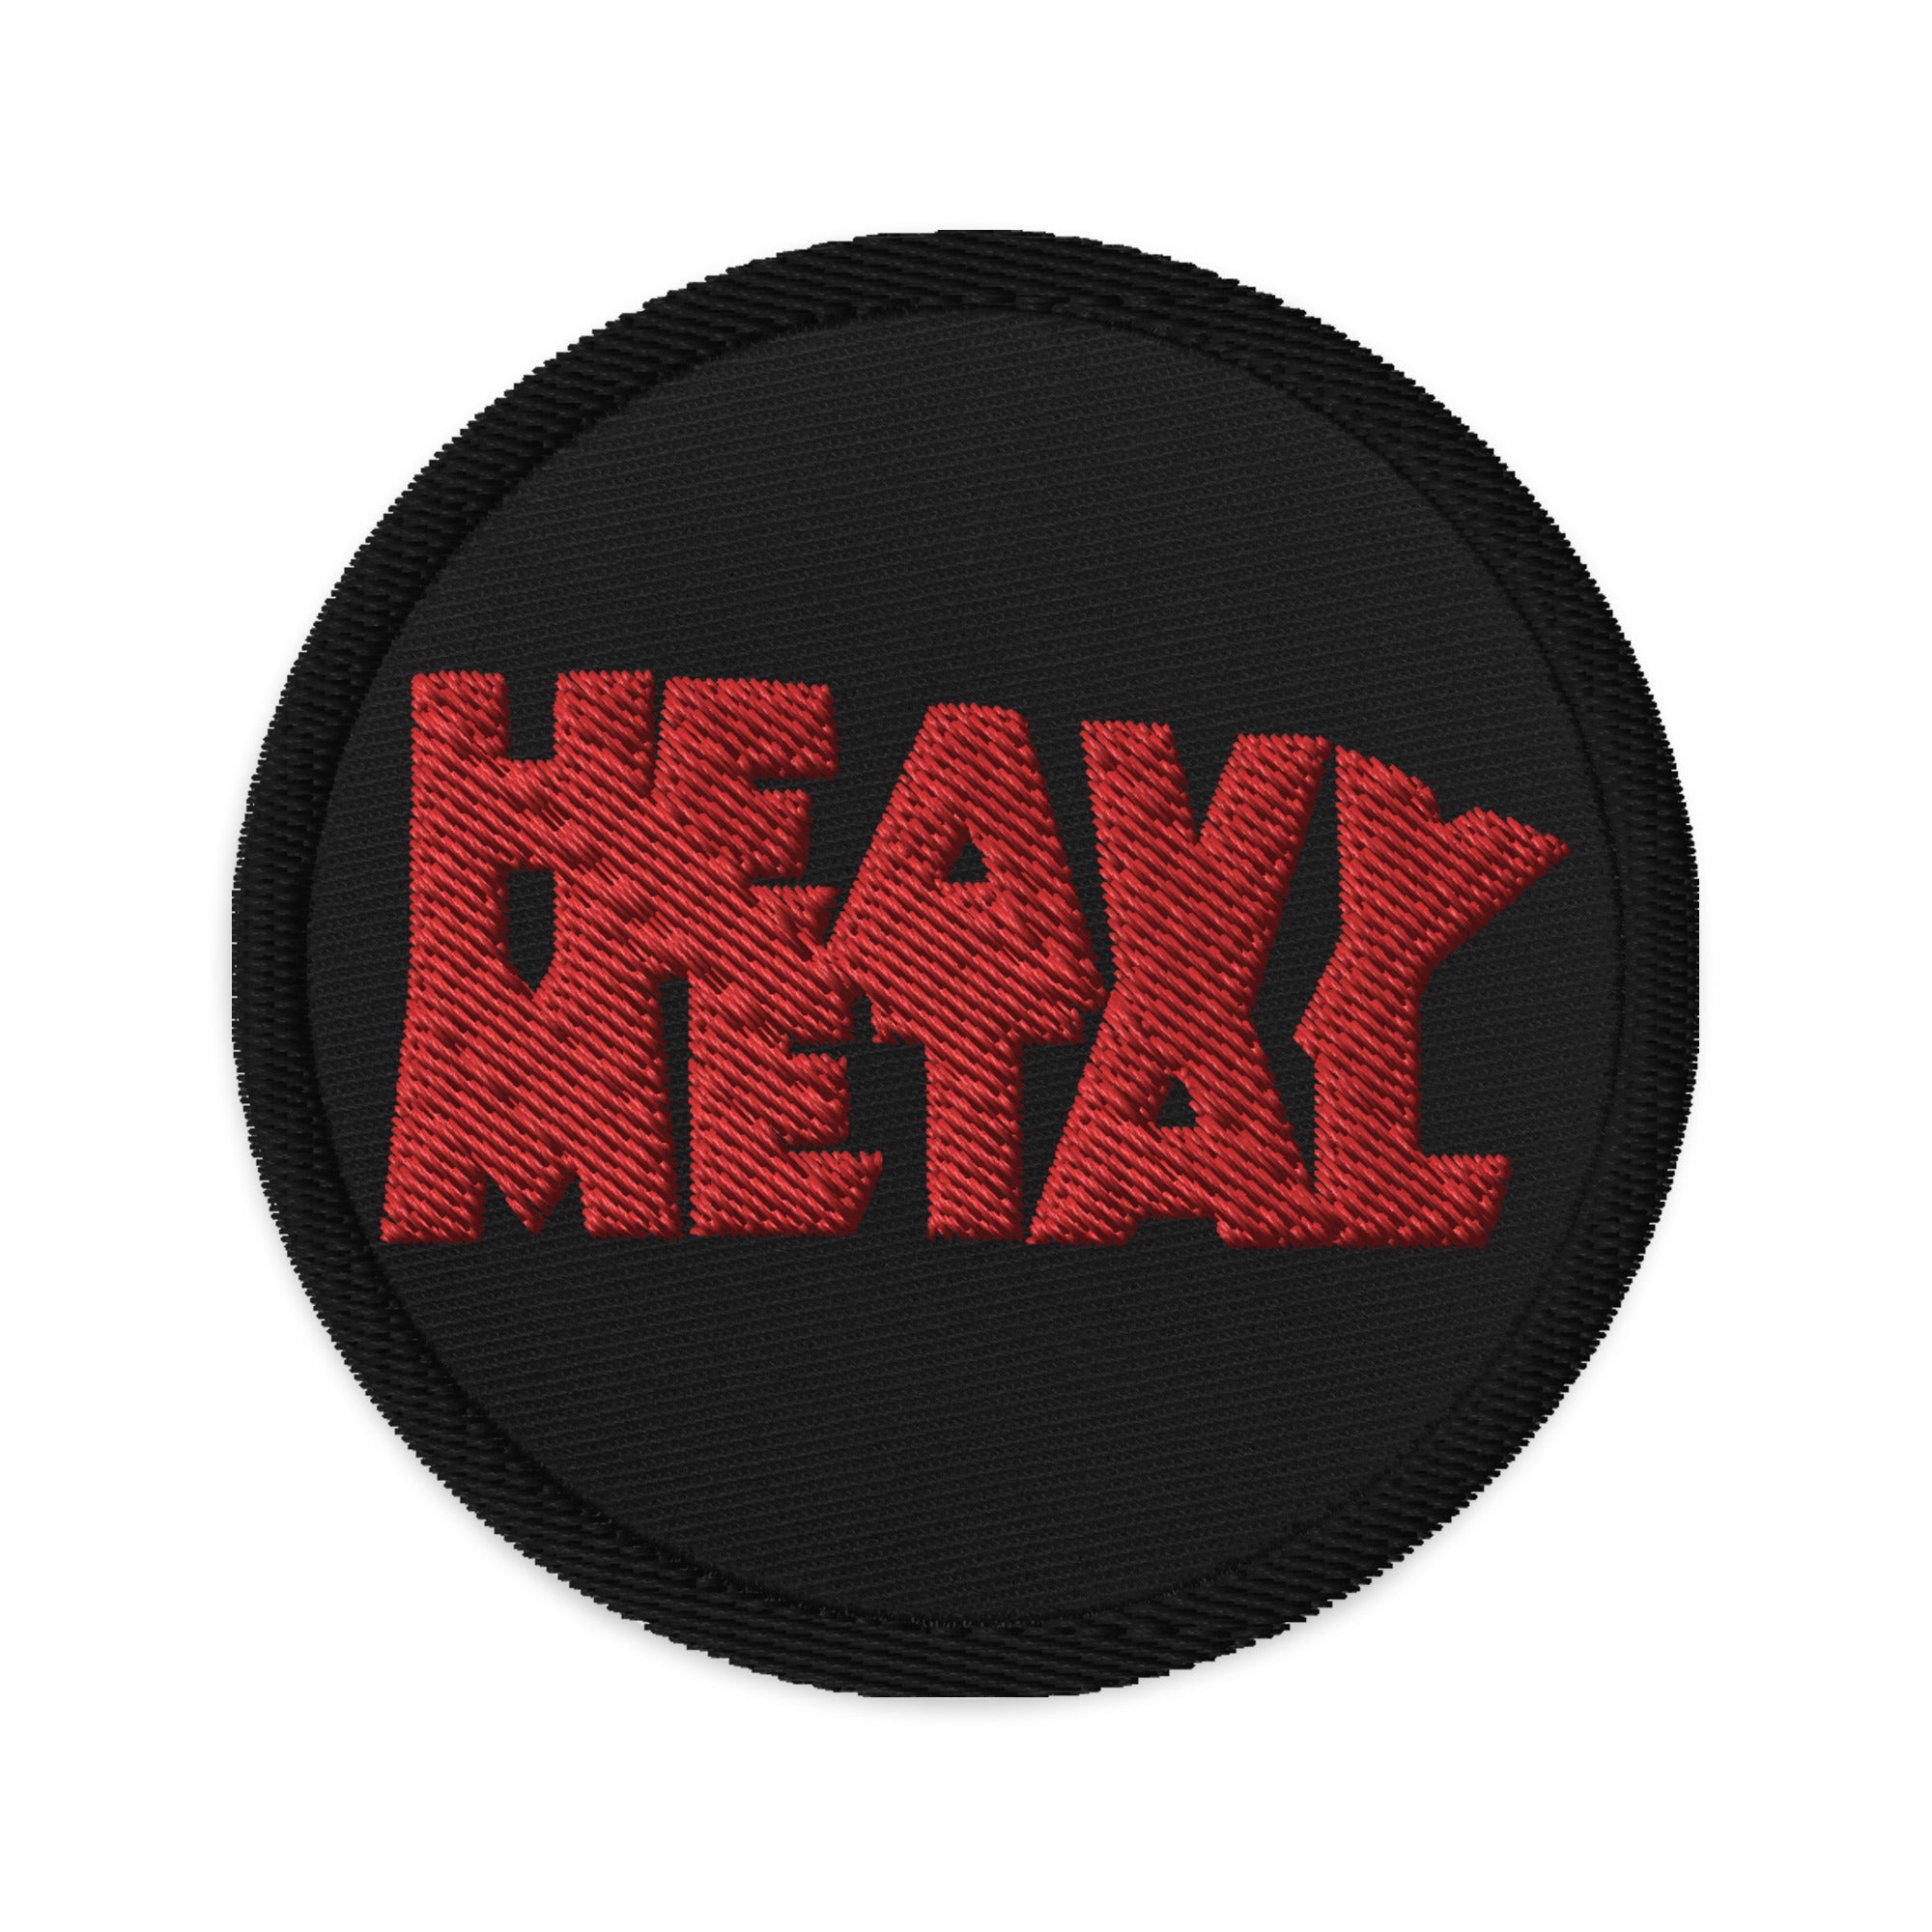 Heavy Metal (Black / Red) Embroidered Patch – Heavy Metal Magazine